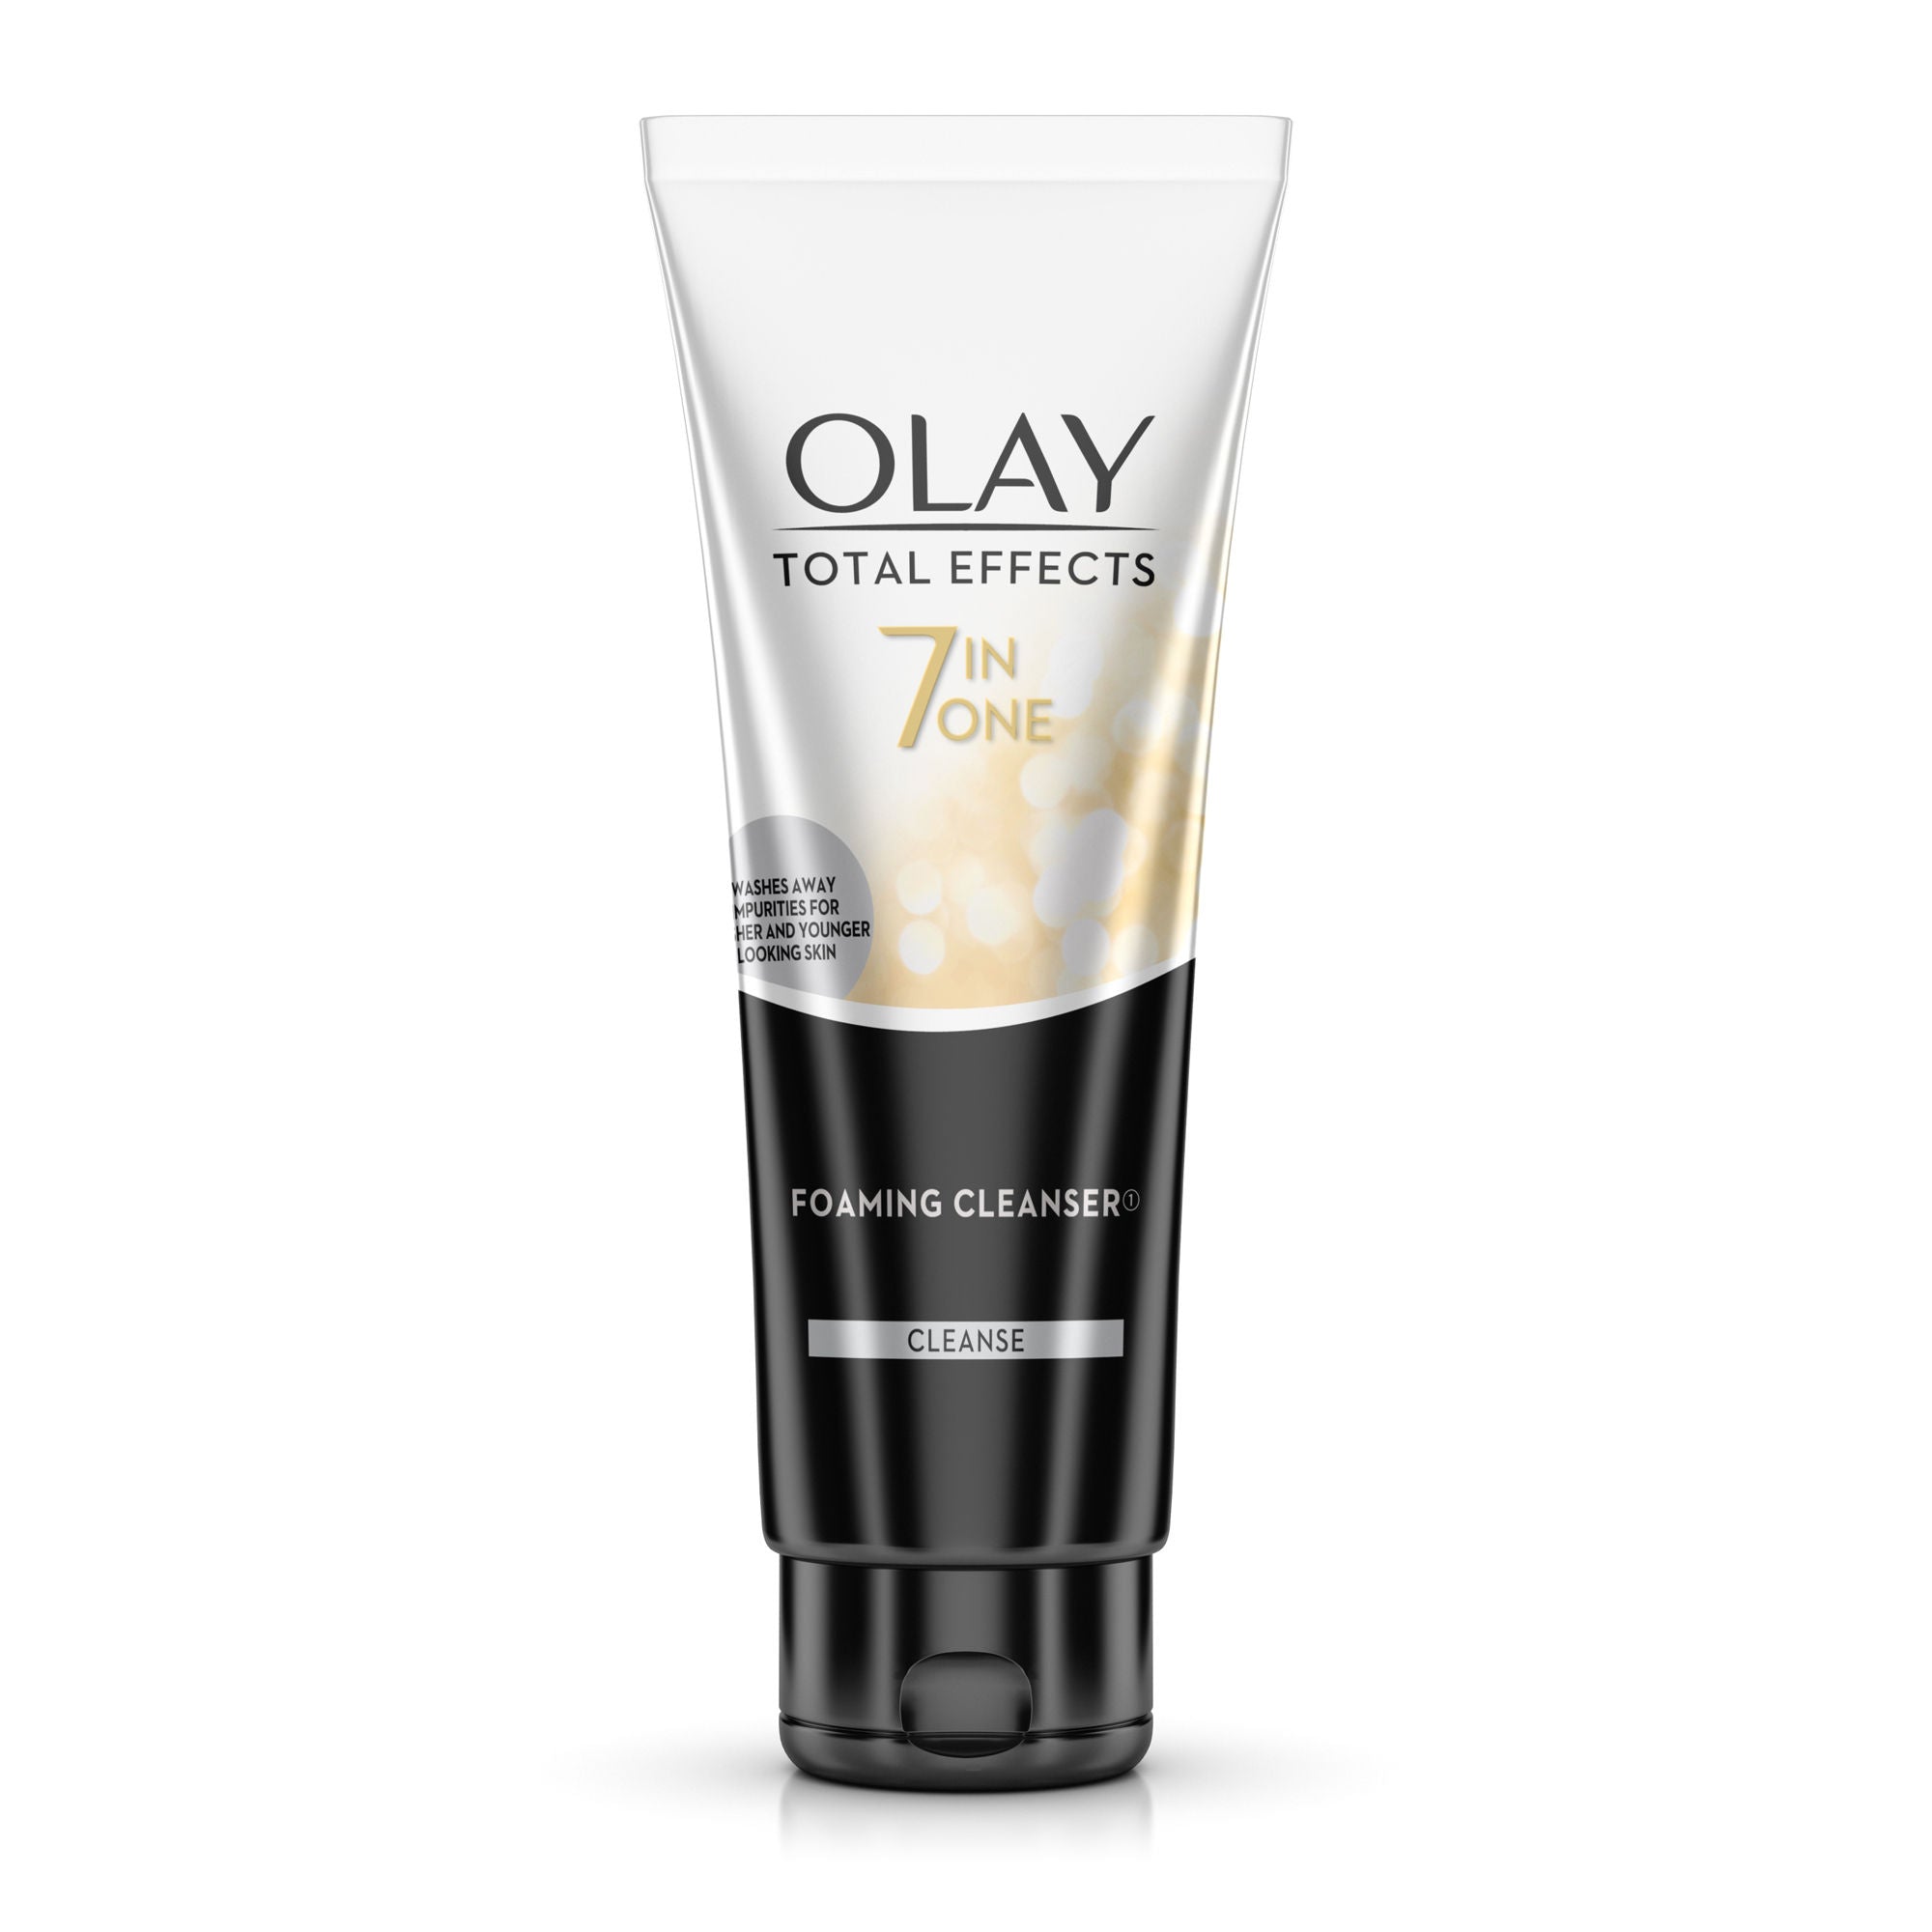 Olay Total Effects 7-In-1 Anti Aging Foaming Cleanser - 100 gms